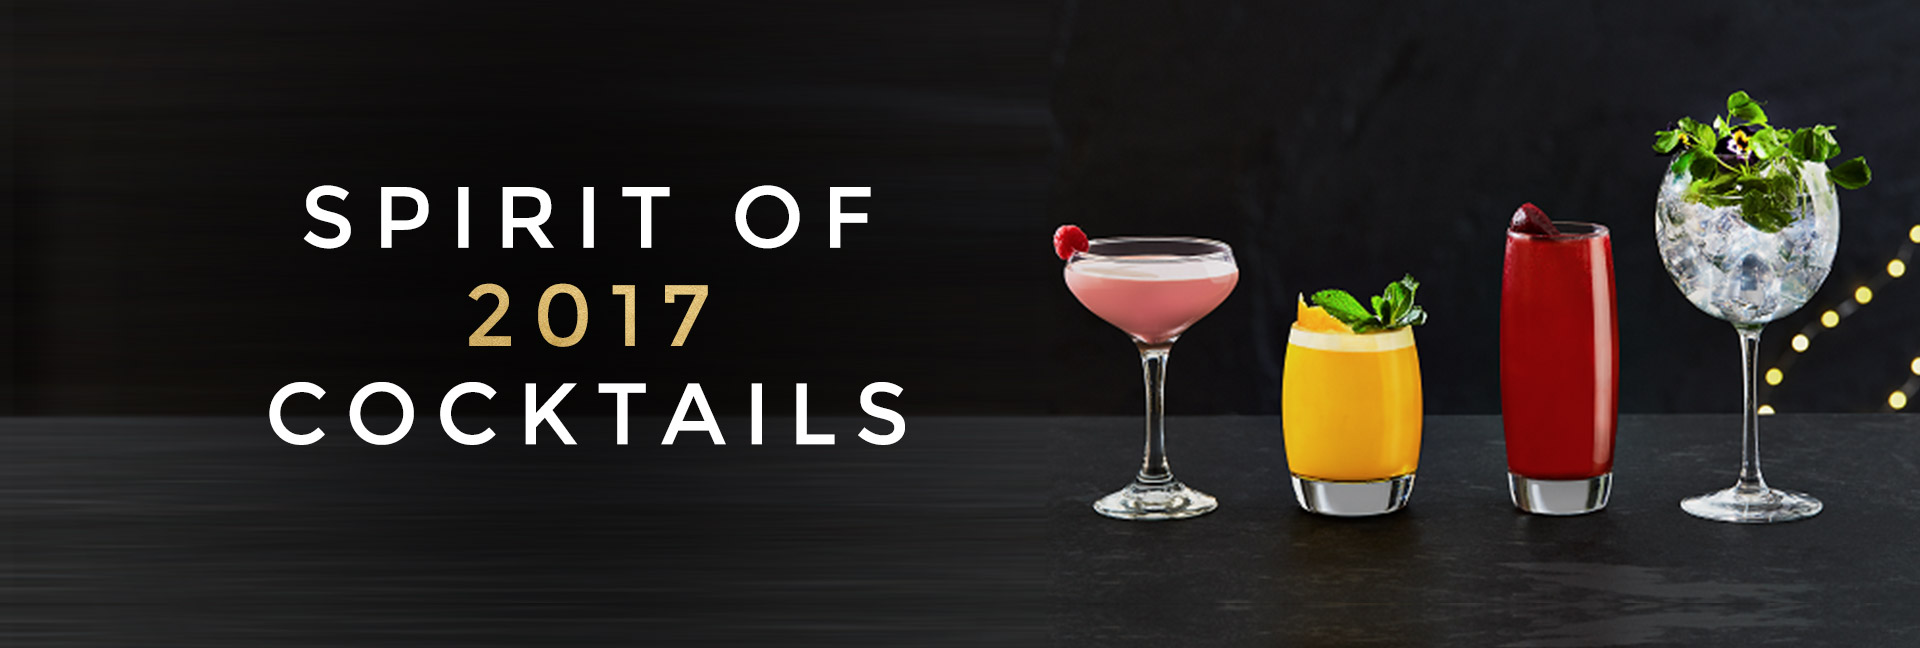 Spirit of 2017 cocktails at All Bar One New Oxford Street